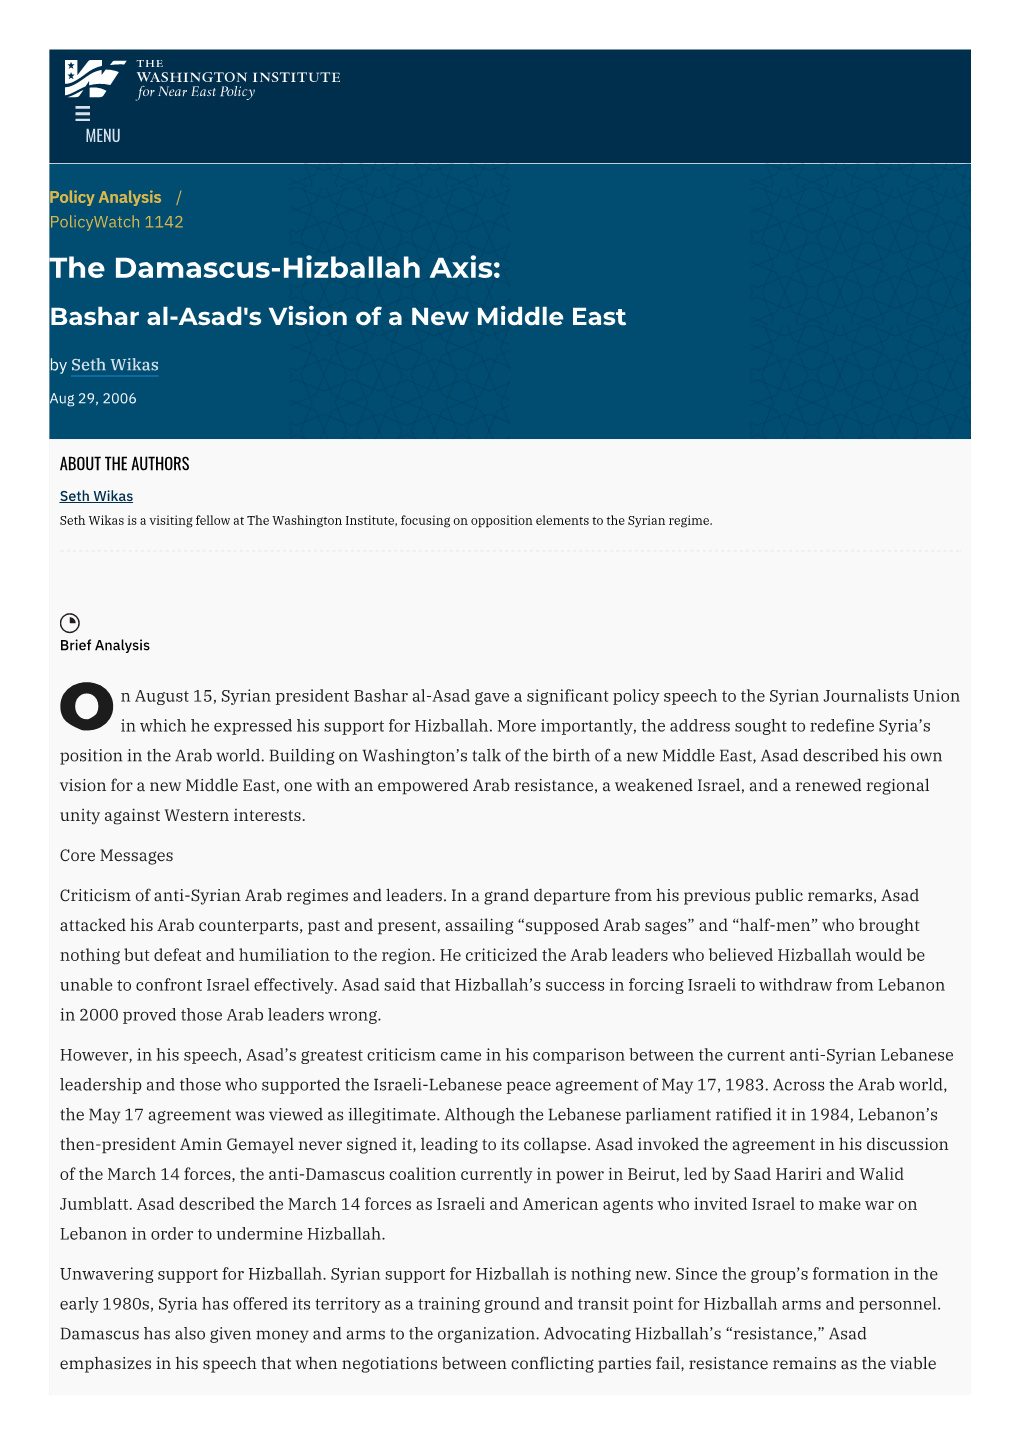 The Damascus-Hizballah Axis: Bashar Al-Asad's Vision of a New Middle East by Seth Wikas